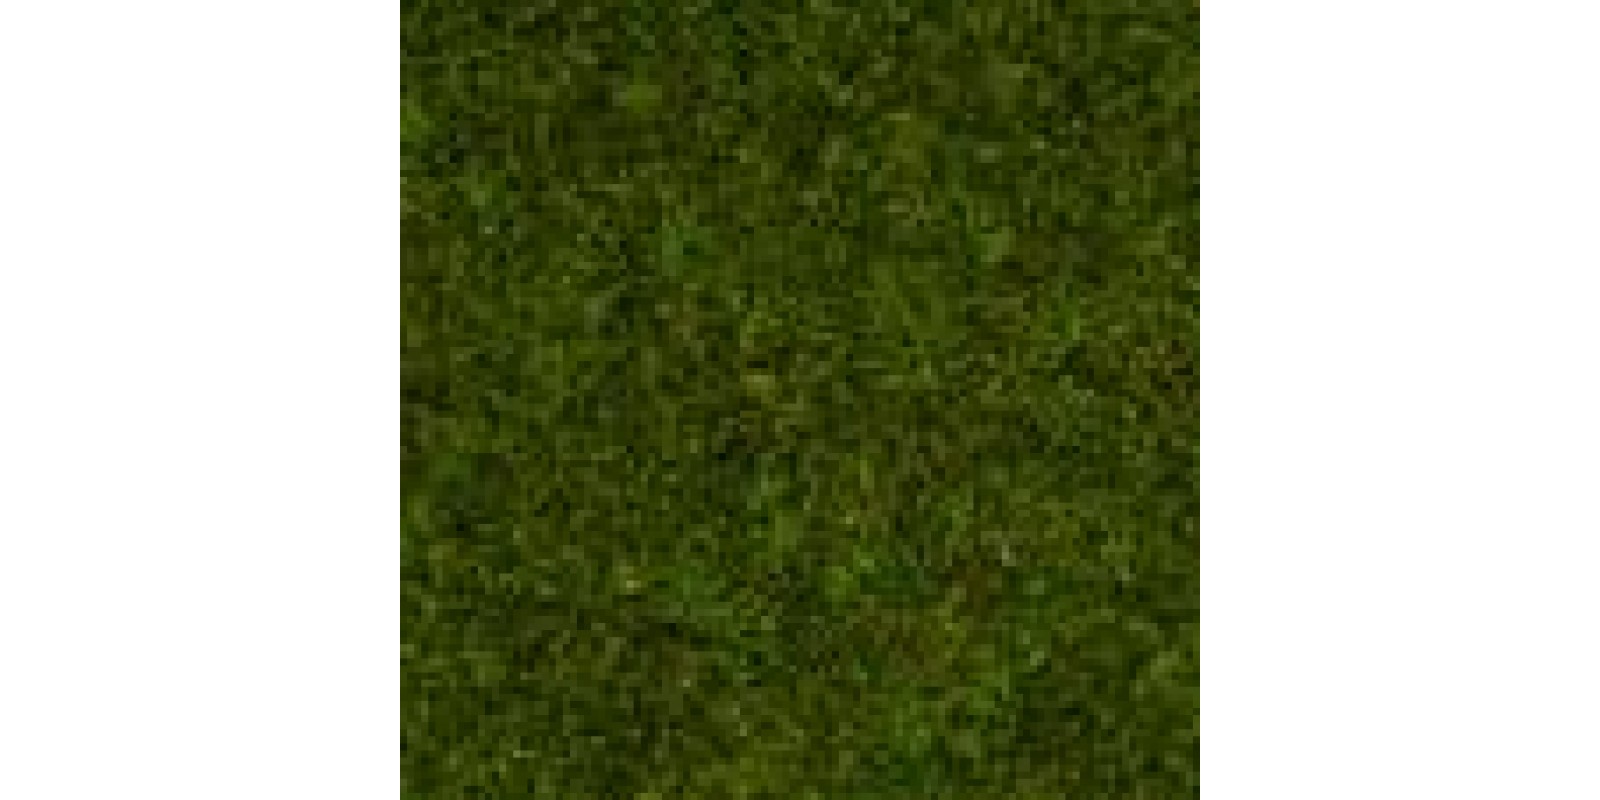  No08312 Scatter Grass Meadow, 2,5 mm, 20 g 